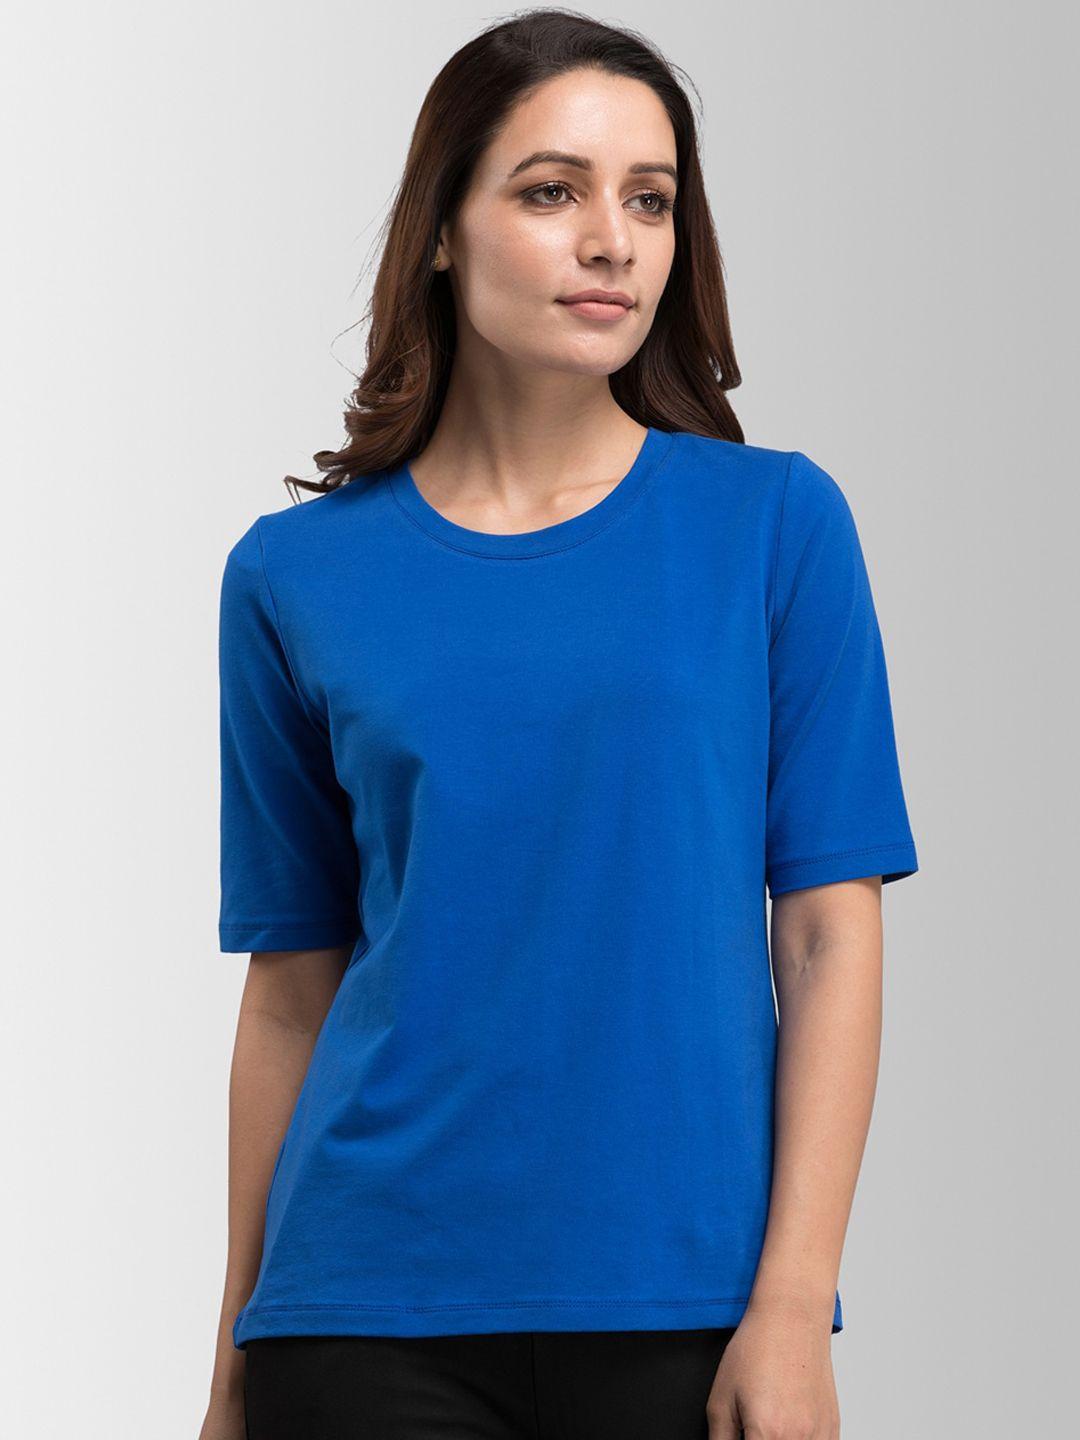 fablestreet women blue solid round neck t-shirt